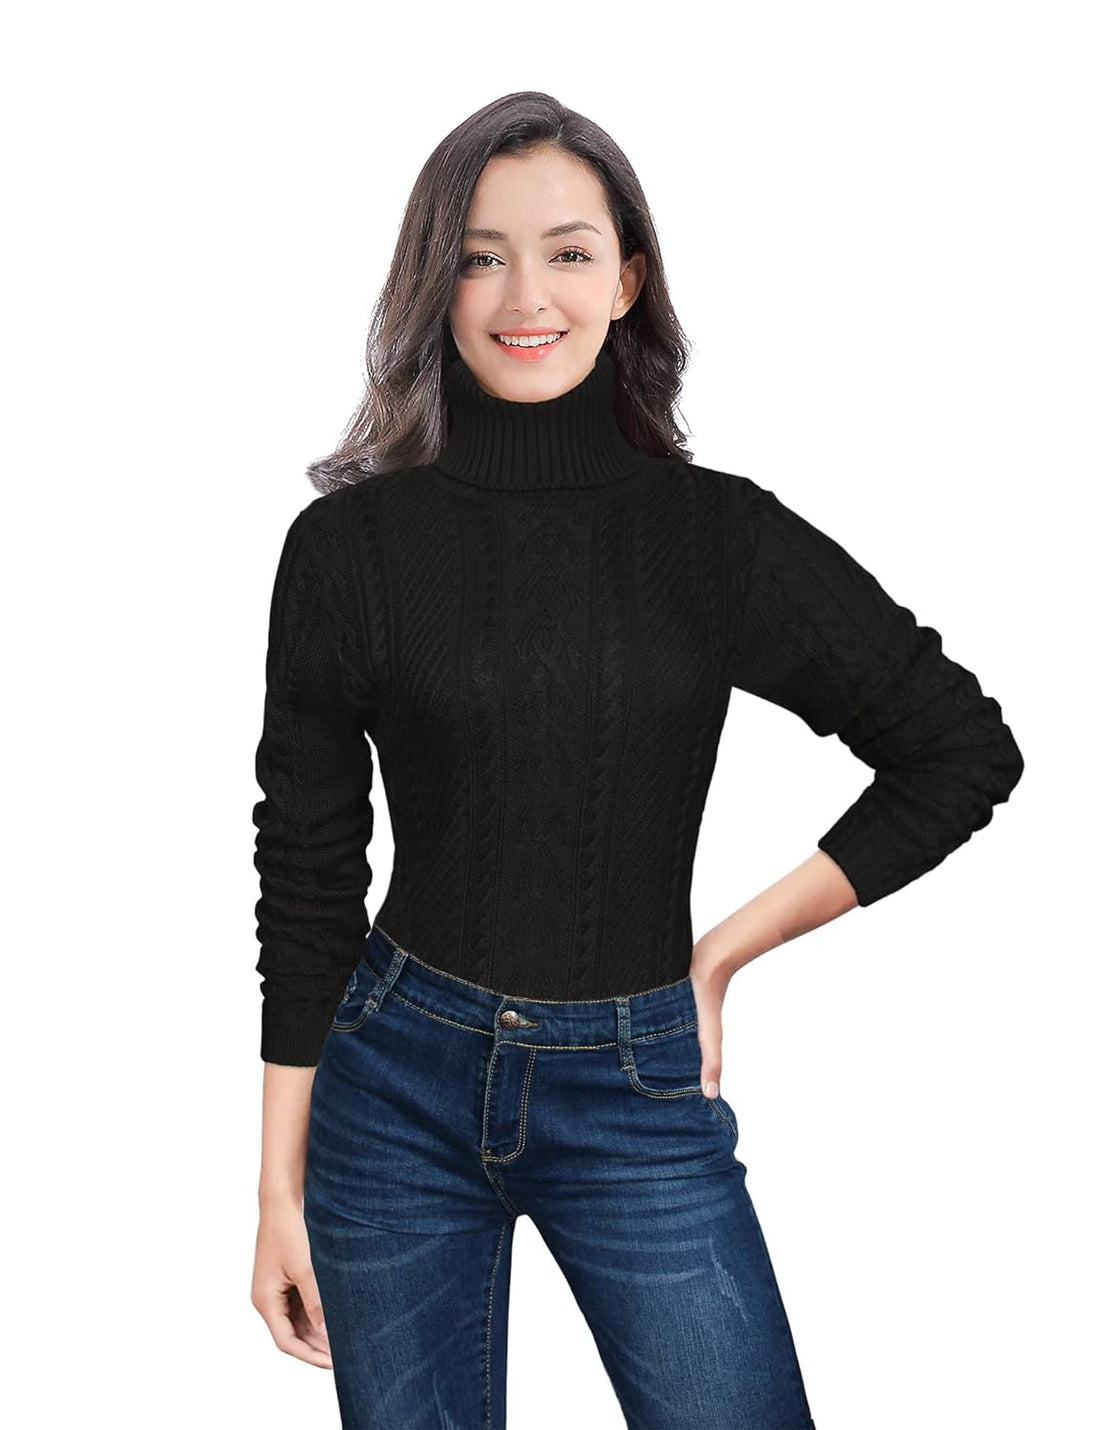 v28 Women Polo Neck Long Slim Fitted Dress Bodycon Turtleneck Cable Knit Sweater, Y Black, Large